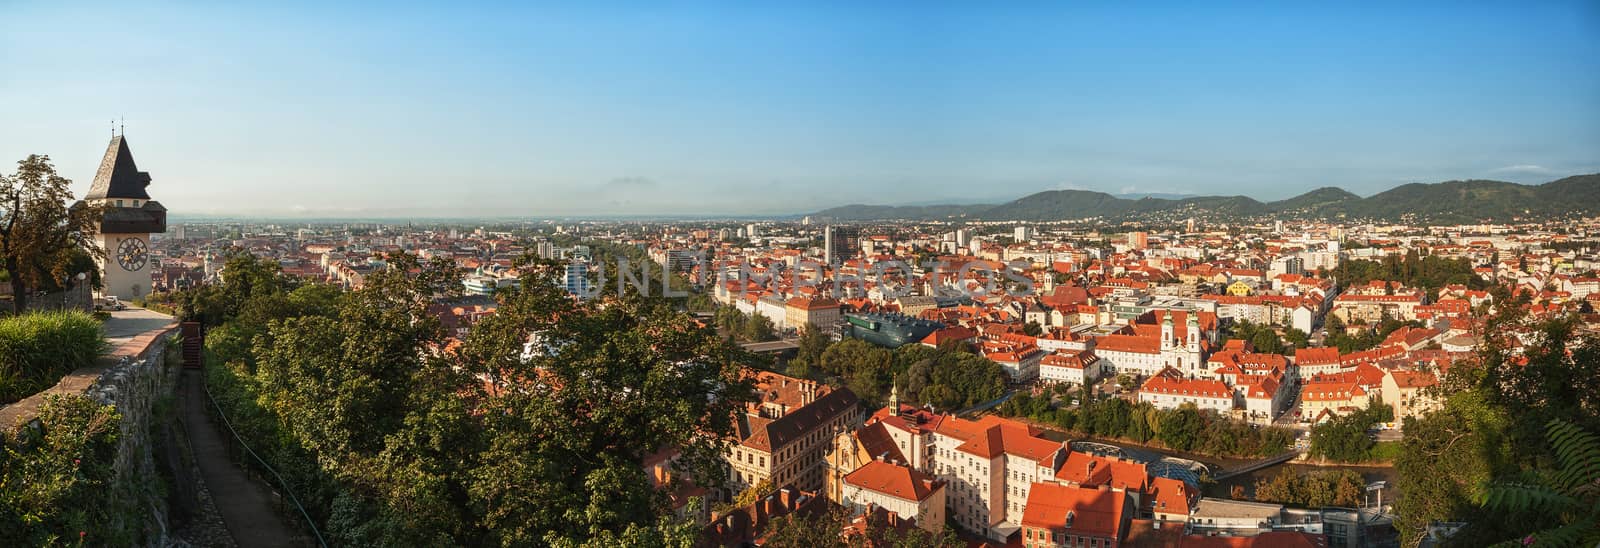 Graz panorama, beautiful view from Schlossberg above the city center.